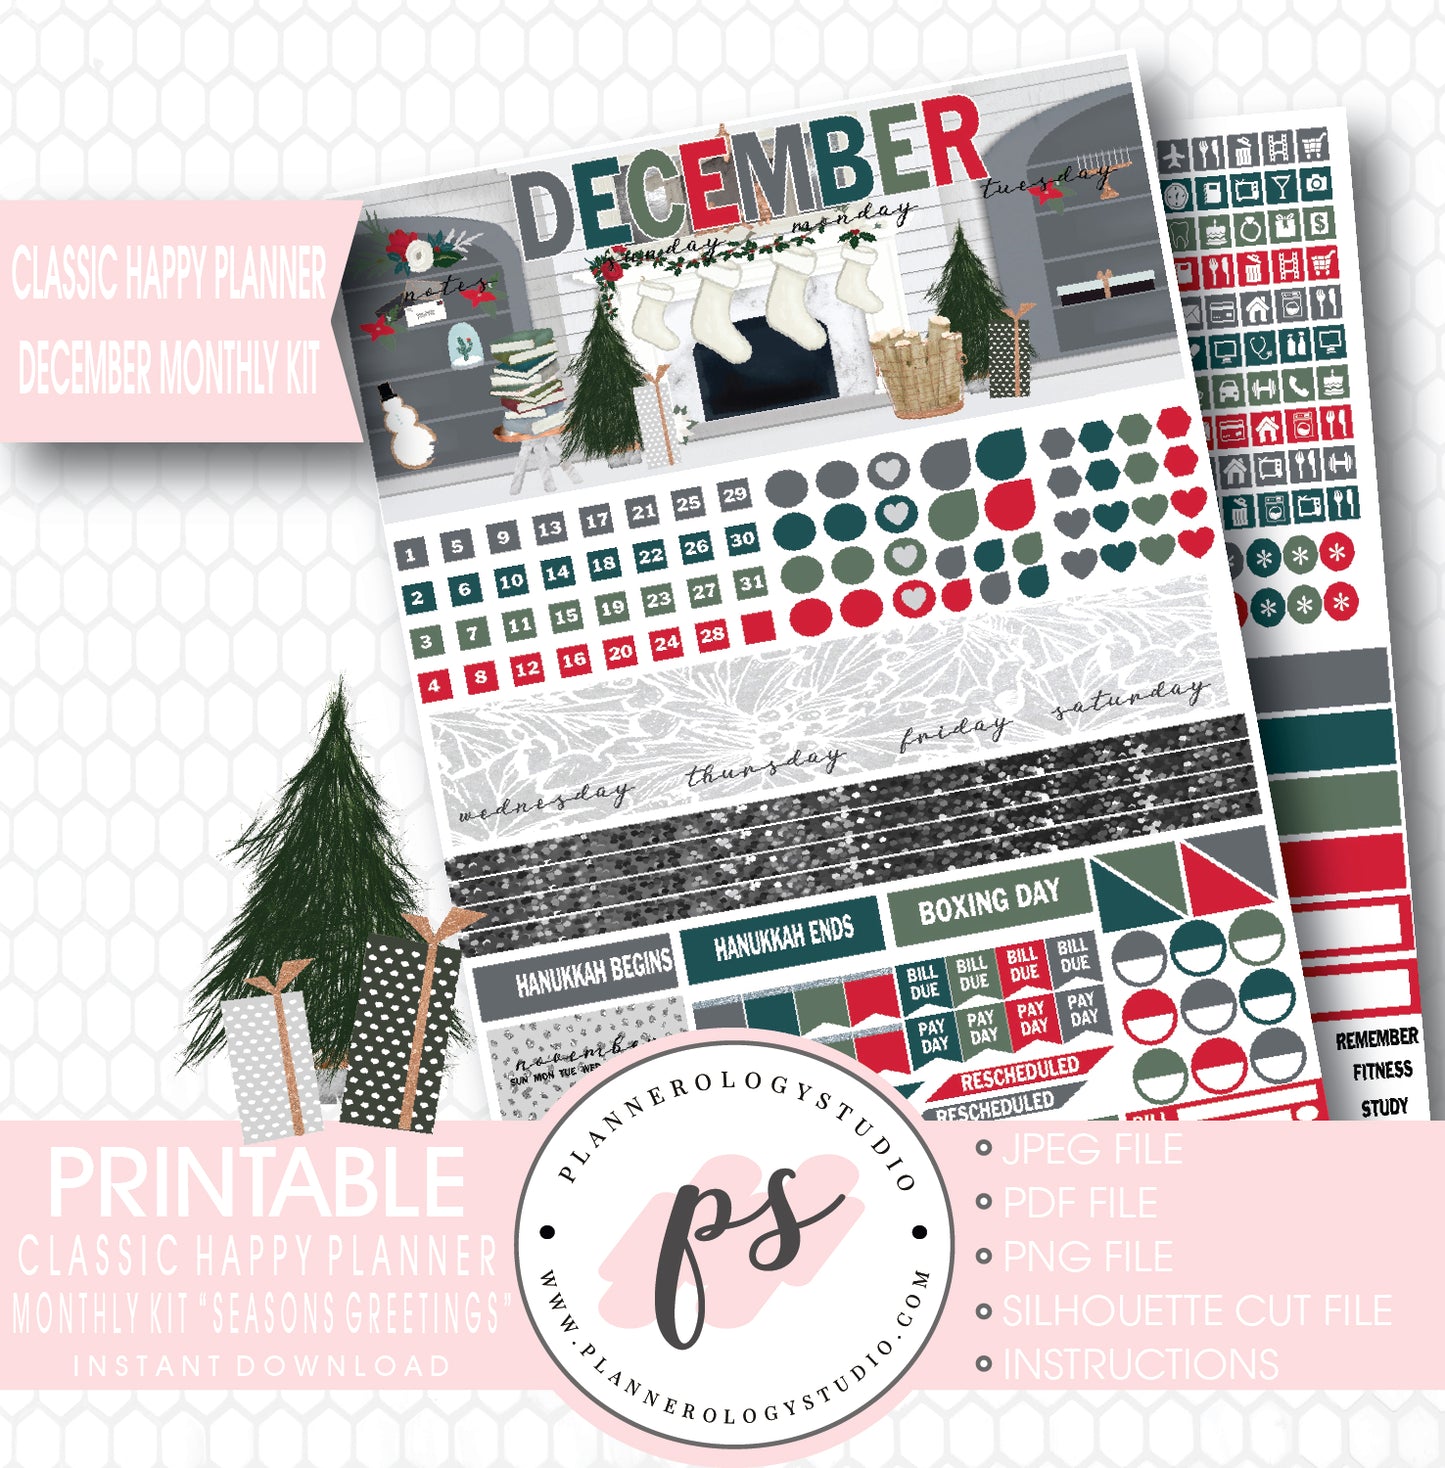 Seasons Greetings Christmas December 2017 Monthly View Kit Printable Planner Stickers (for use with Classic Happy Planner) - Plannerologystudio